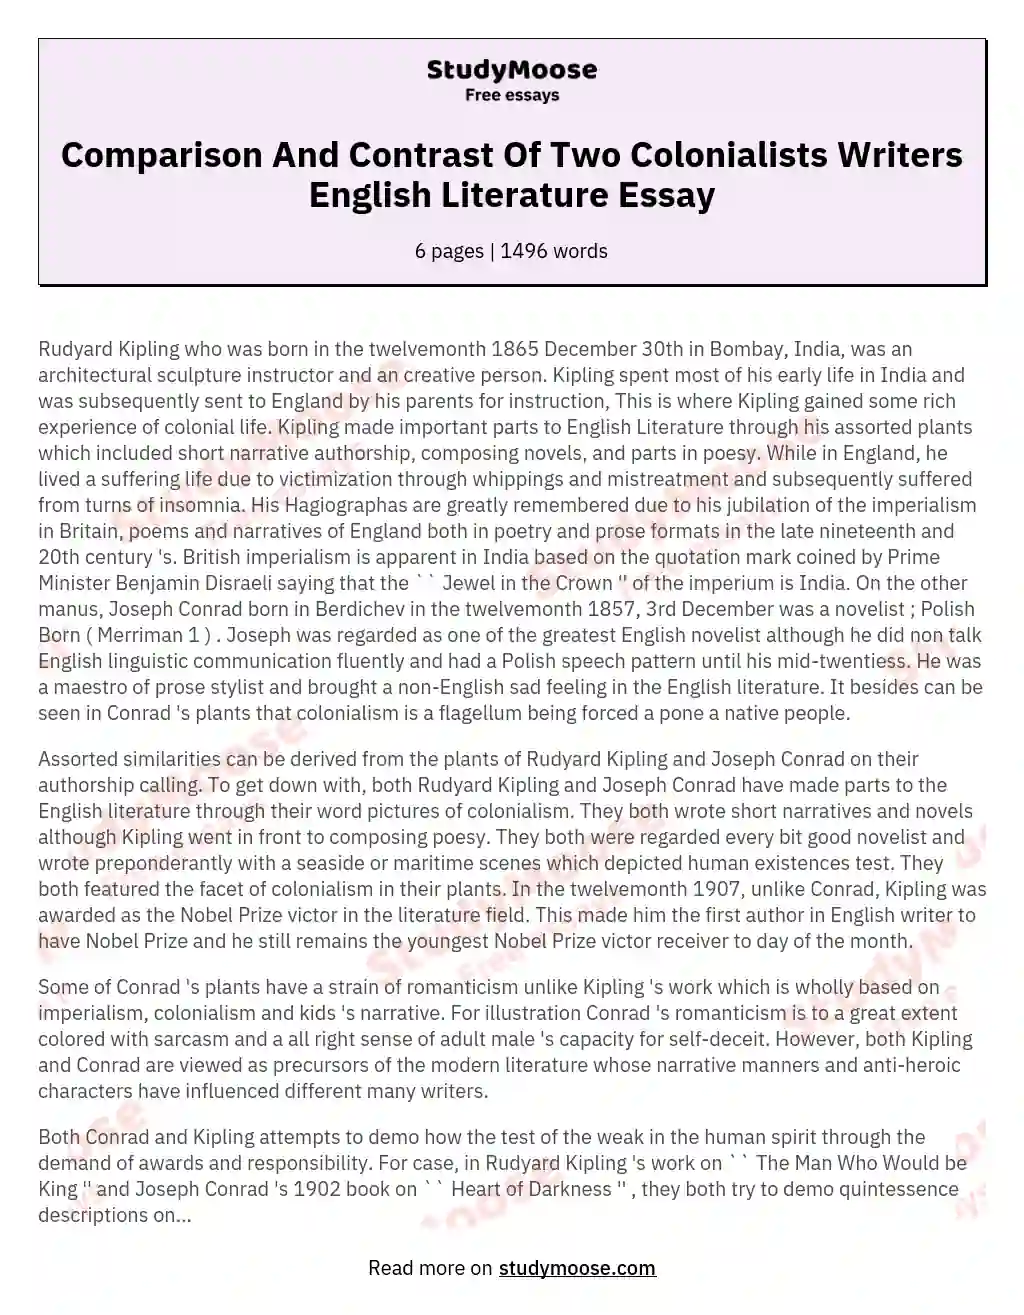 Comparison And Contrast Of Two Colonialists Writers English Literature Essay essay